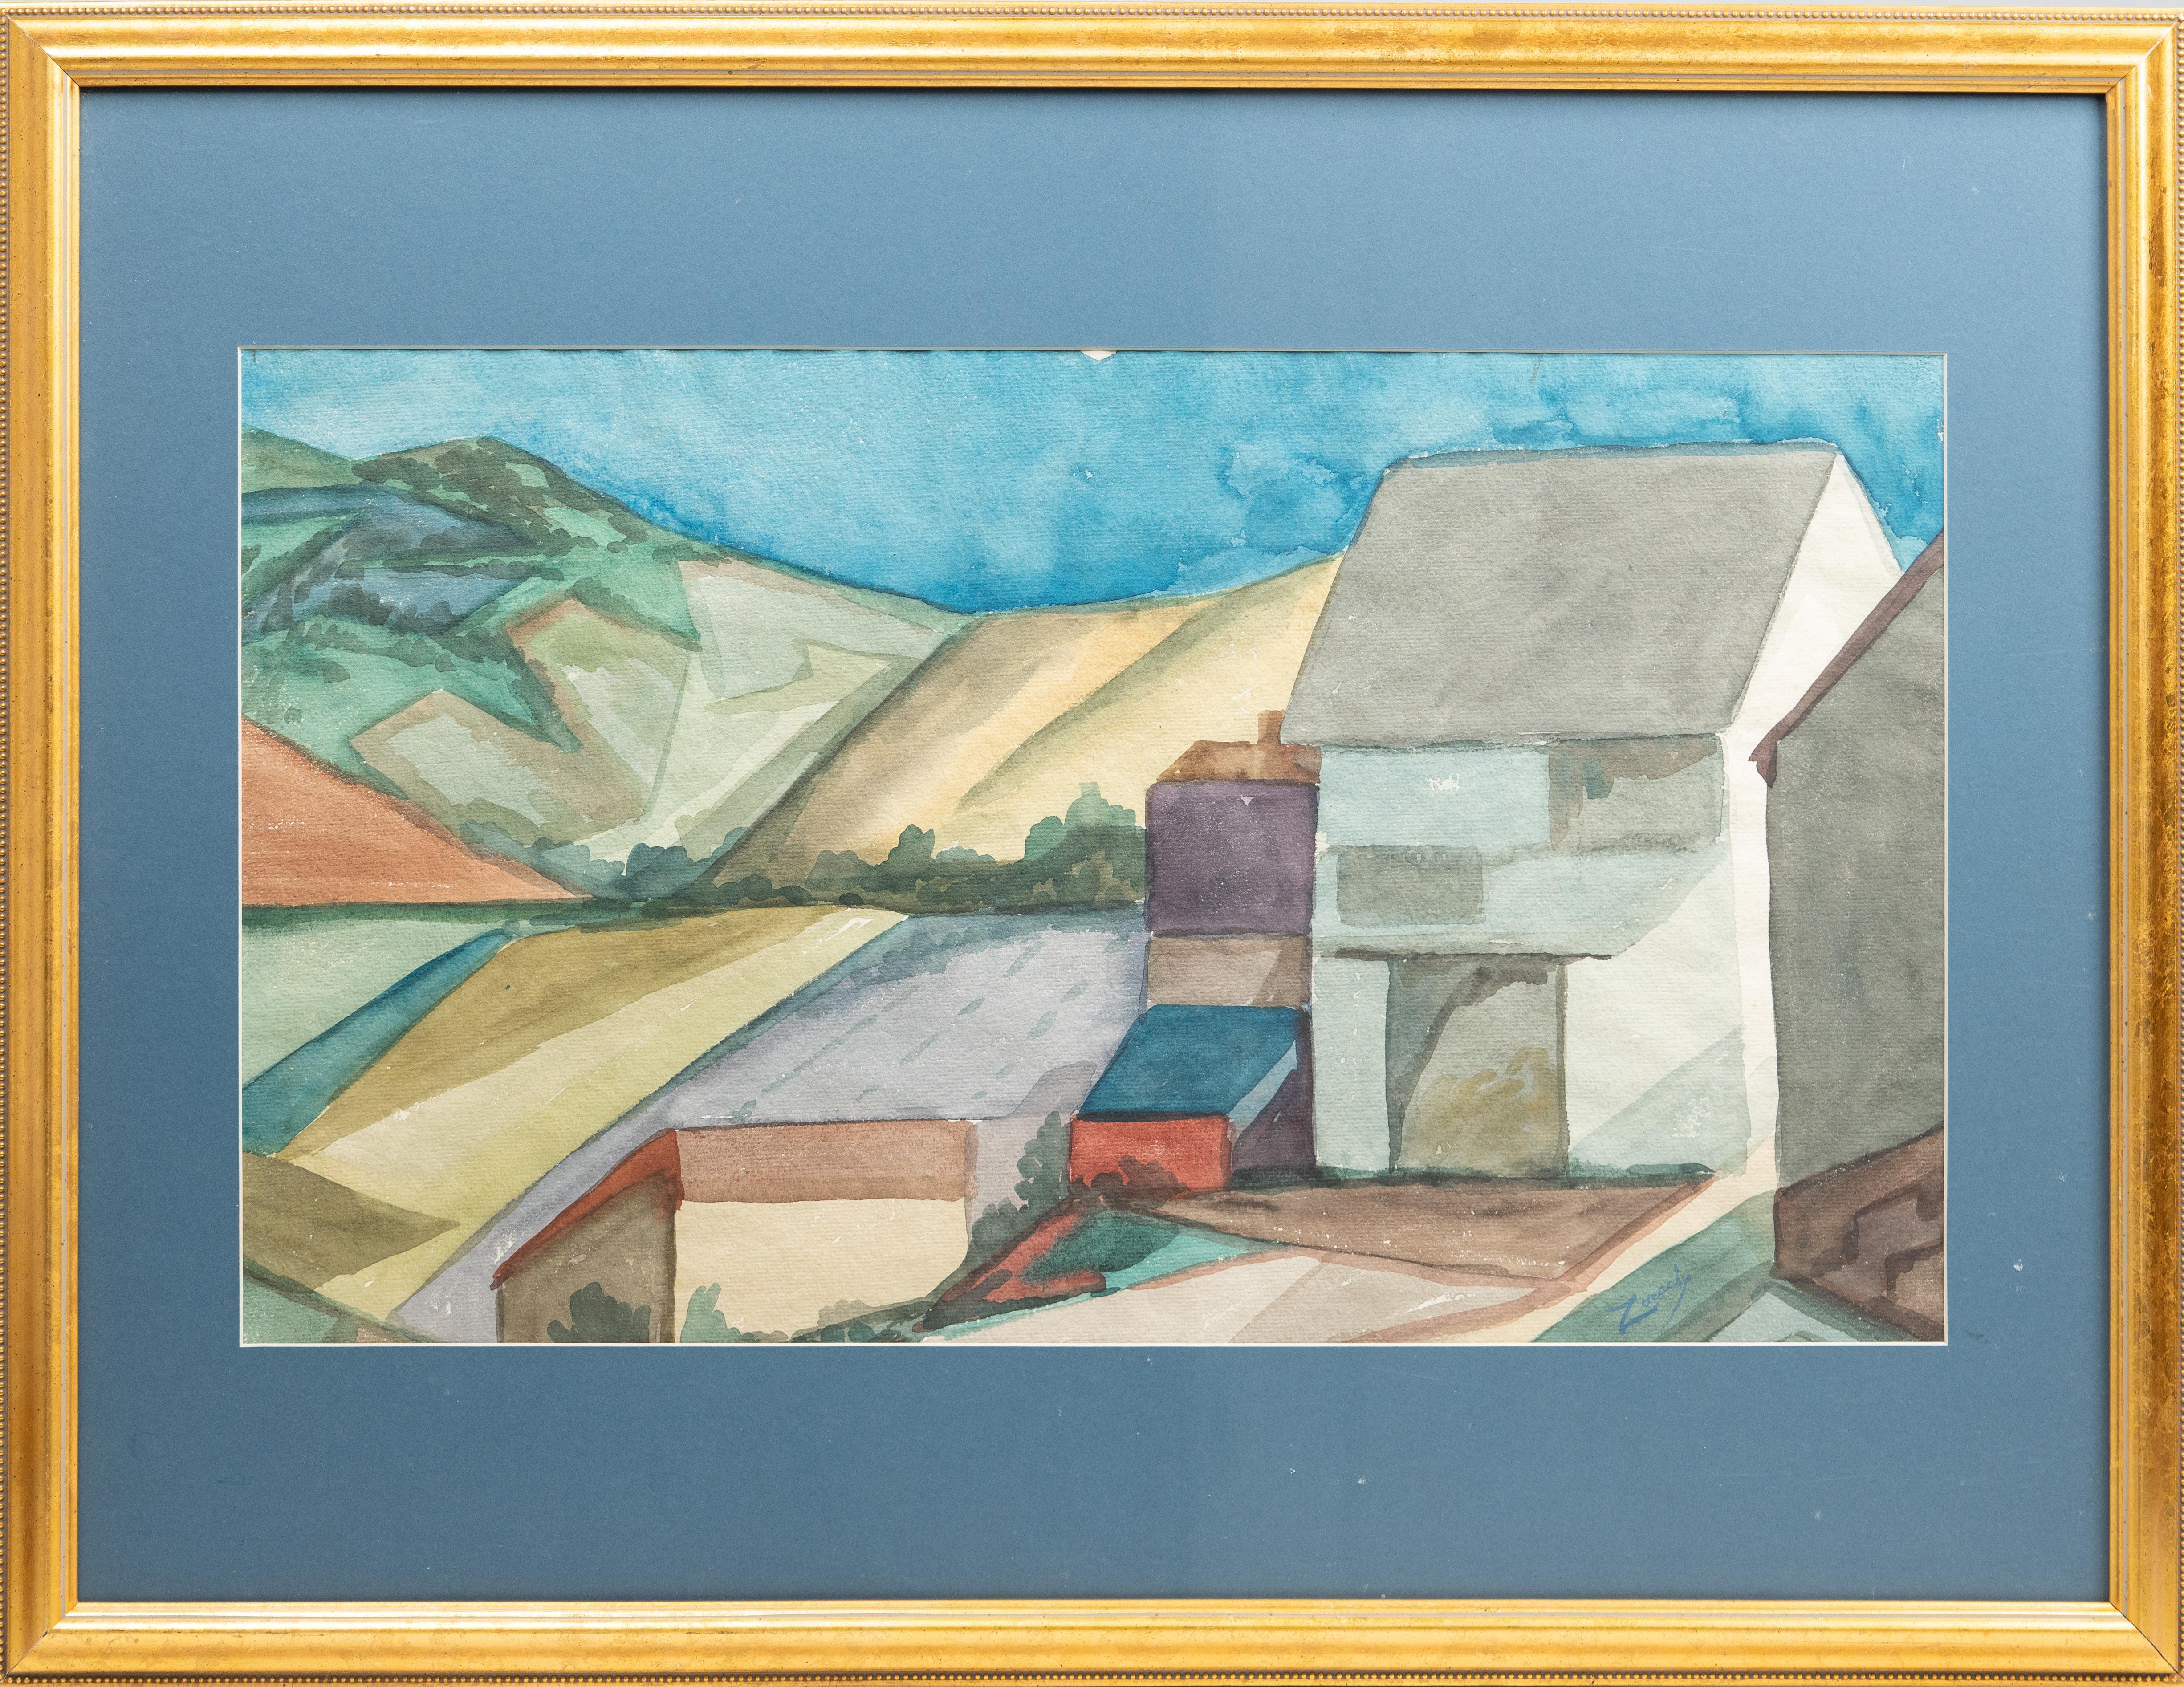 Signed William Zorach (Lithuanian/American, 1887 - 1966). 'New England Landscape View'. Original watercolor painting on paper, circa 1920s. Signed lower right, 'Zorach'.

William Zorach is known for abstract sculpture, modernist landscape and